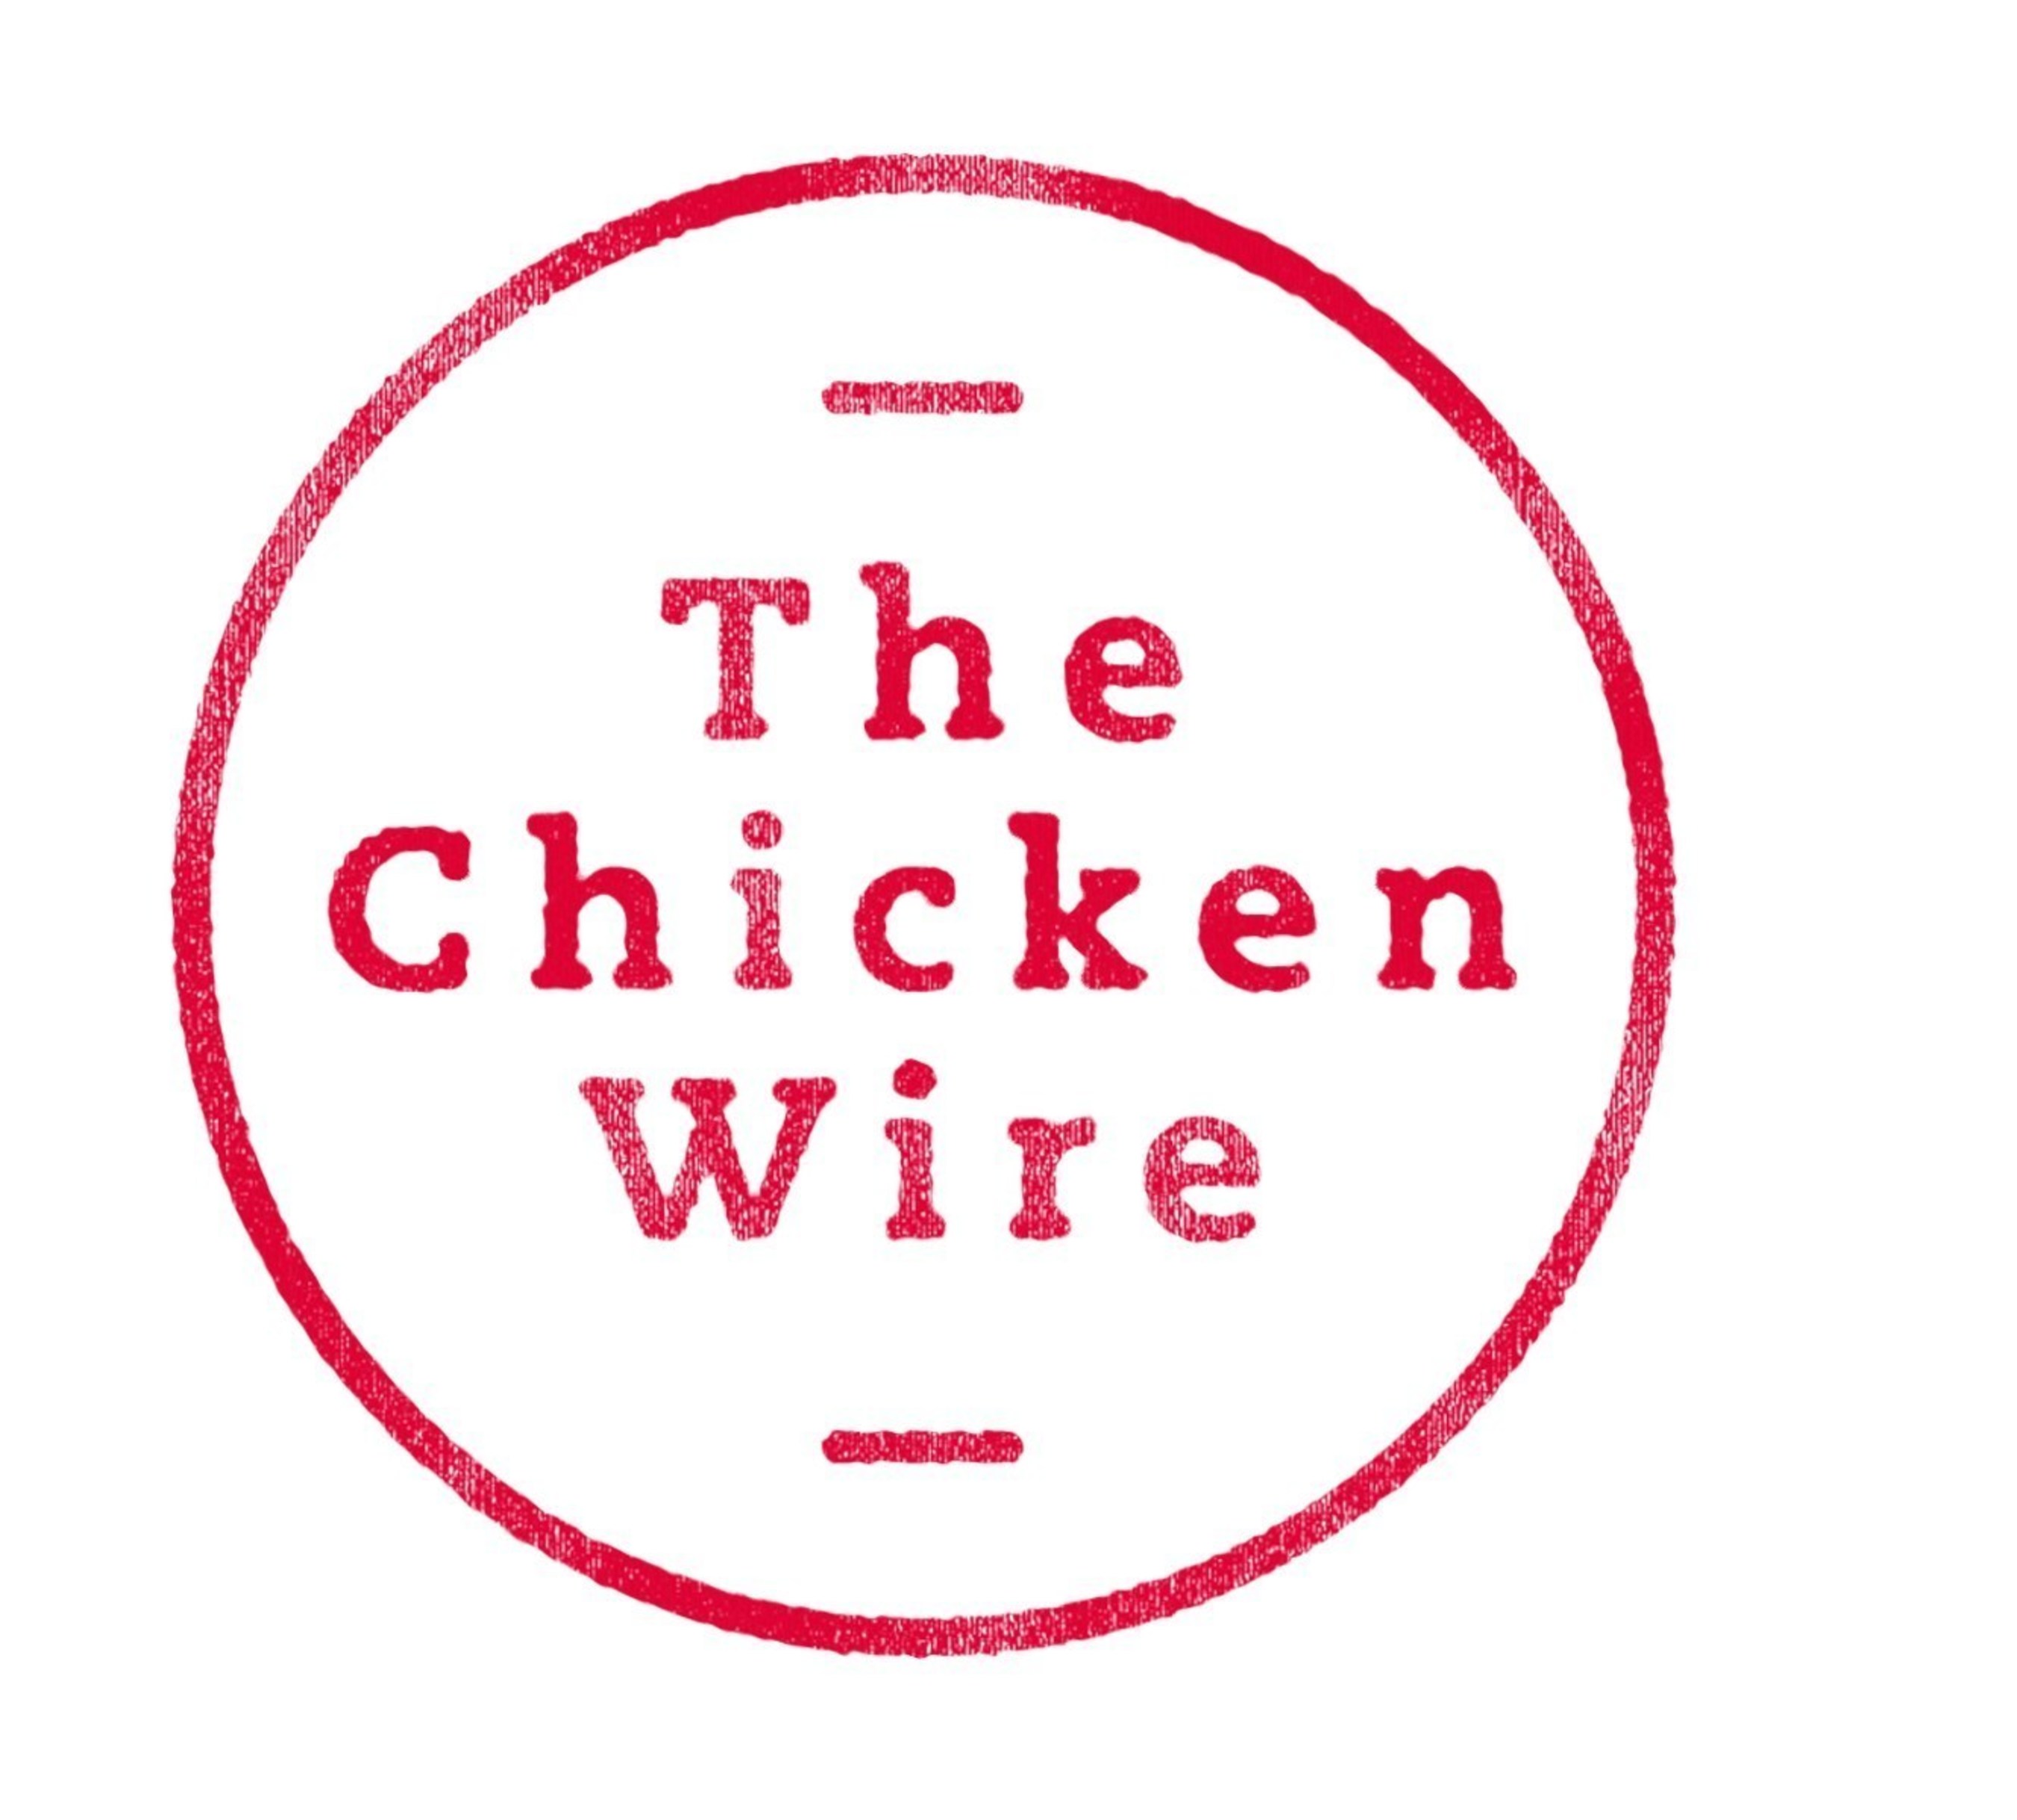 The new chick-fil-a.com houses an embedded publication, called The Chicken Wire, that provides visitors with both branded and unbranded stories.